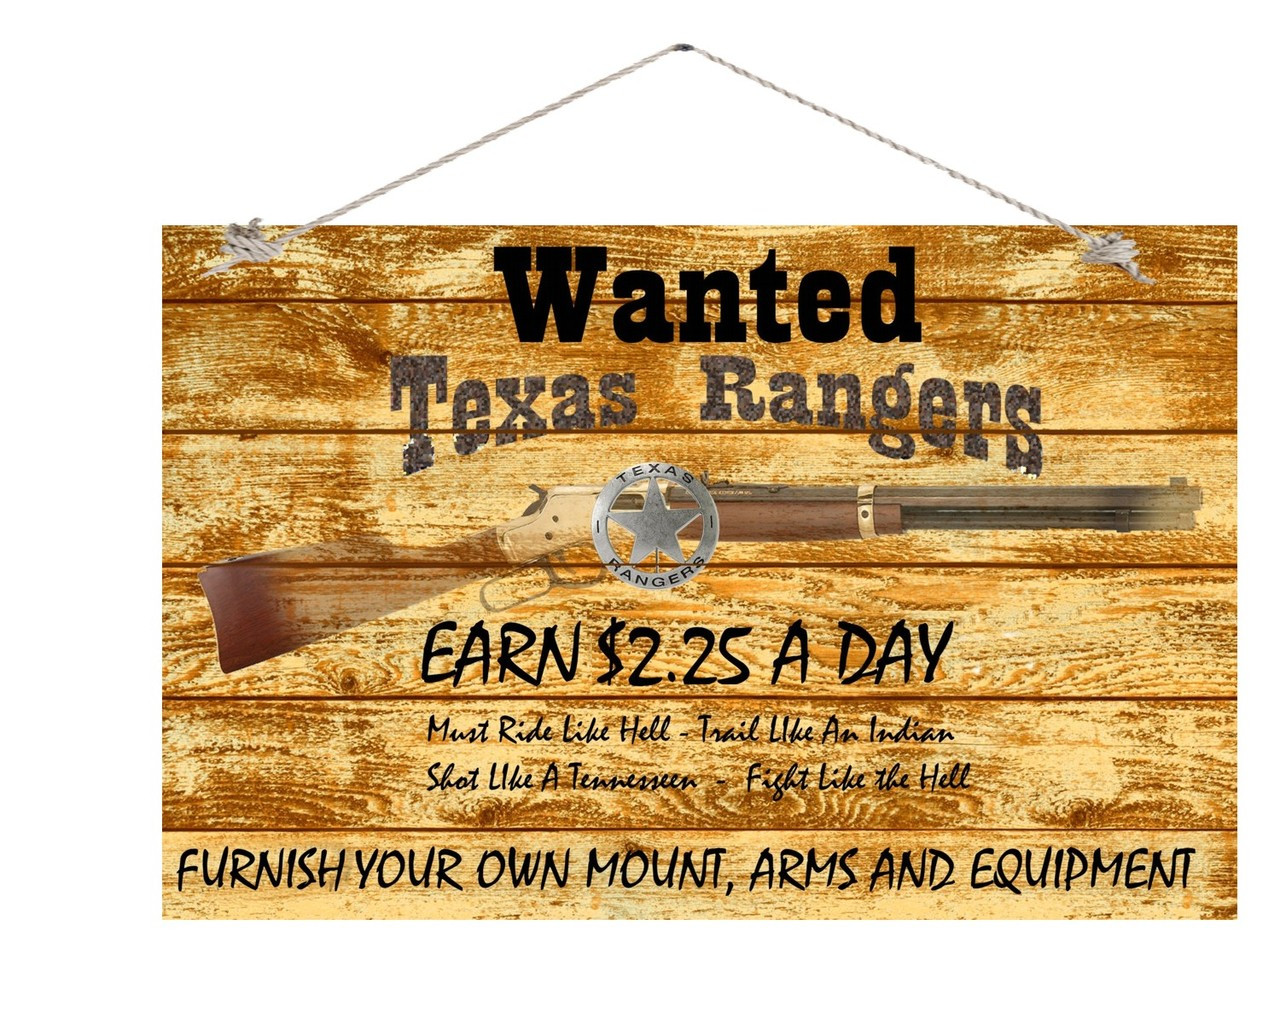 Wanted Texas Ranges Earn 2.25 A Day 12" X 18" wood sign